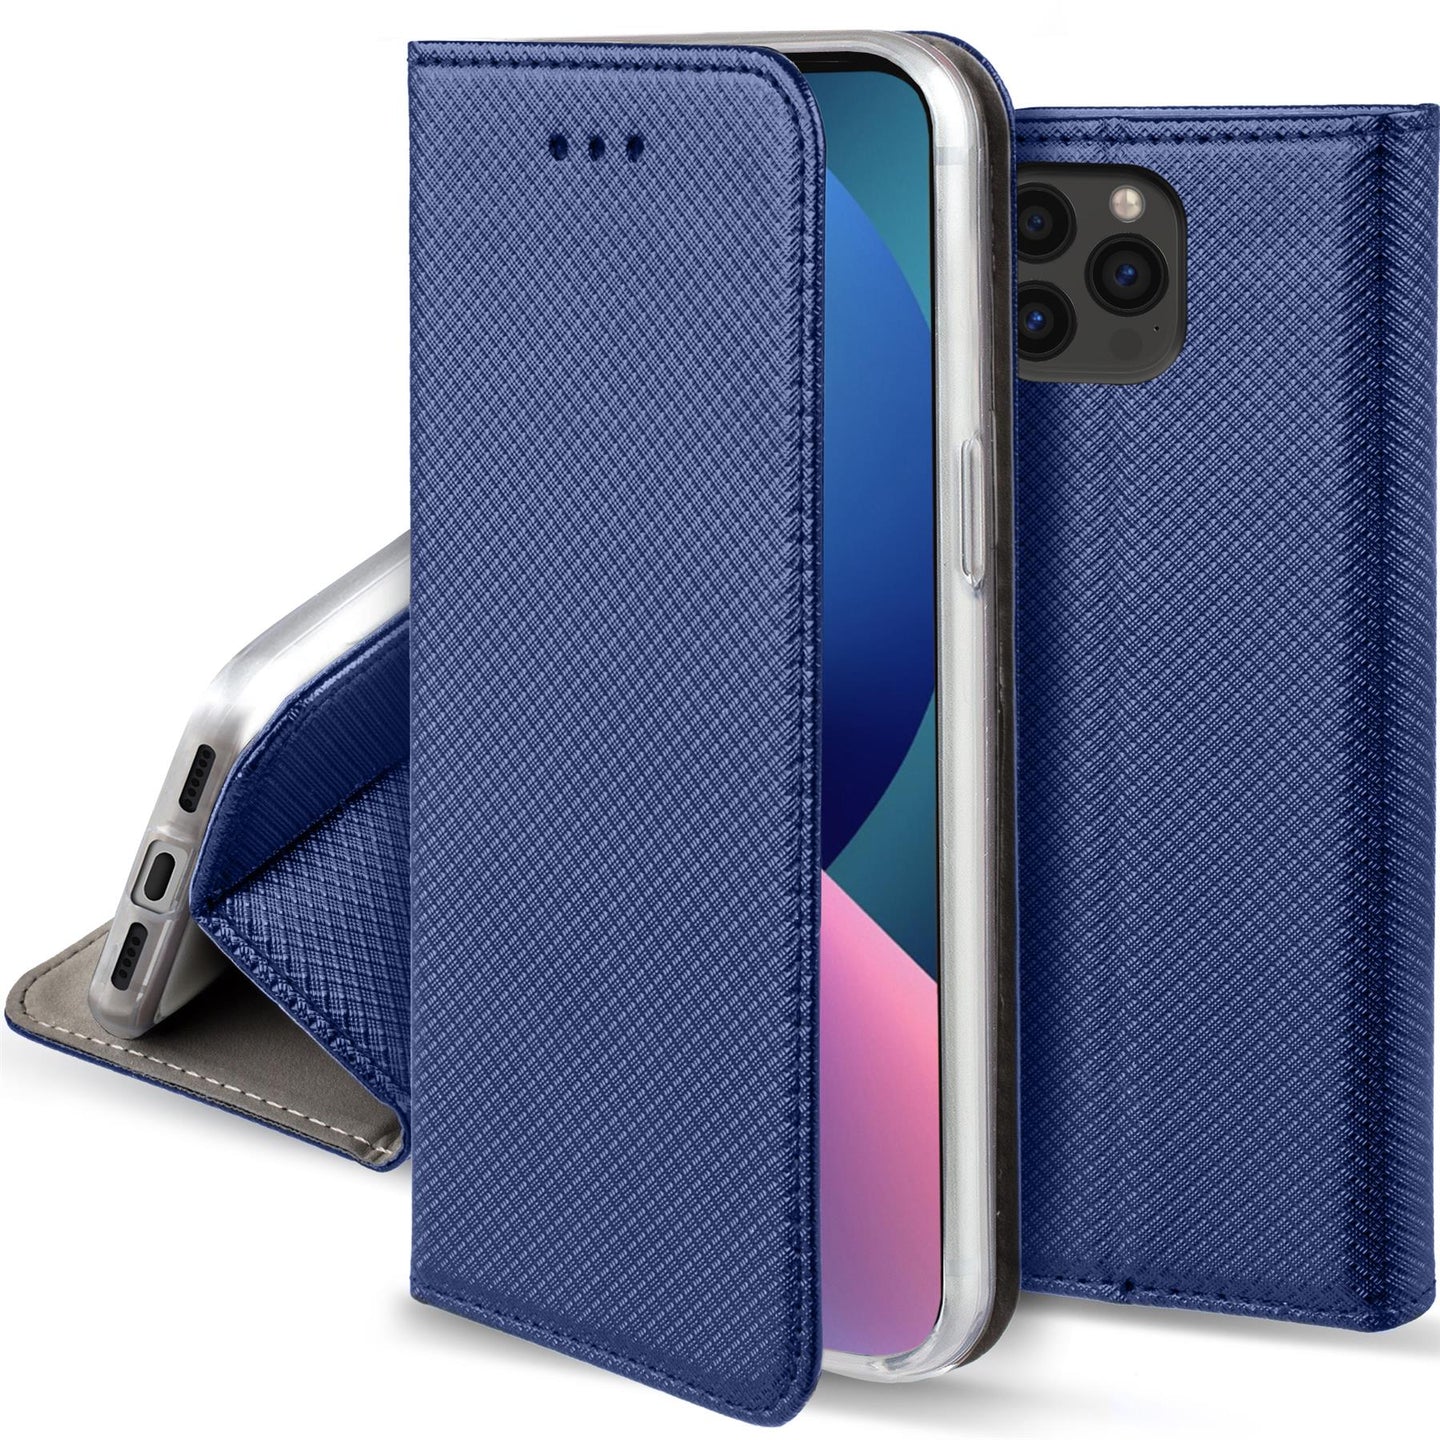 Moozy Case Flip Cover for iPhone 13 Pro Max, Dark Blue - Smart Magnetic Flip Case Flip Folio Wallet Case with Card Holder and Stand, Credit Card Slots